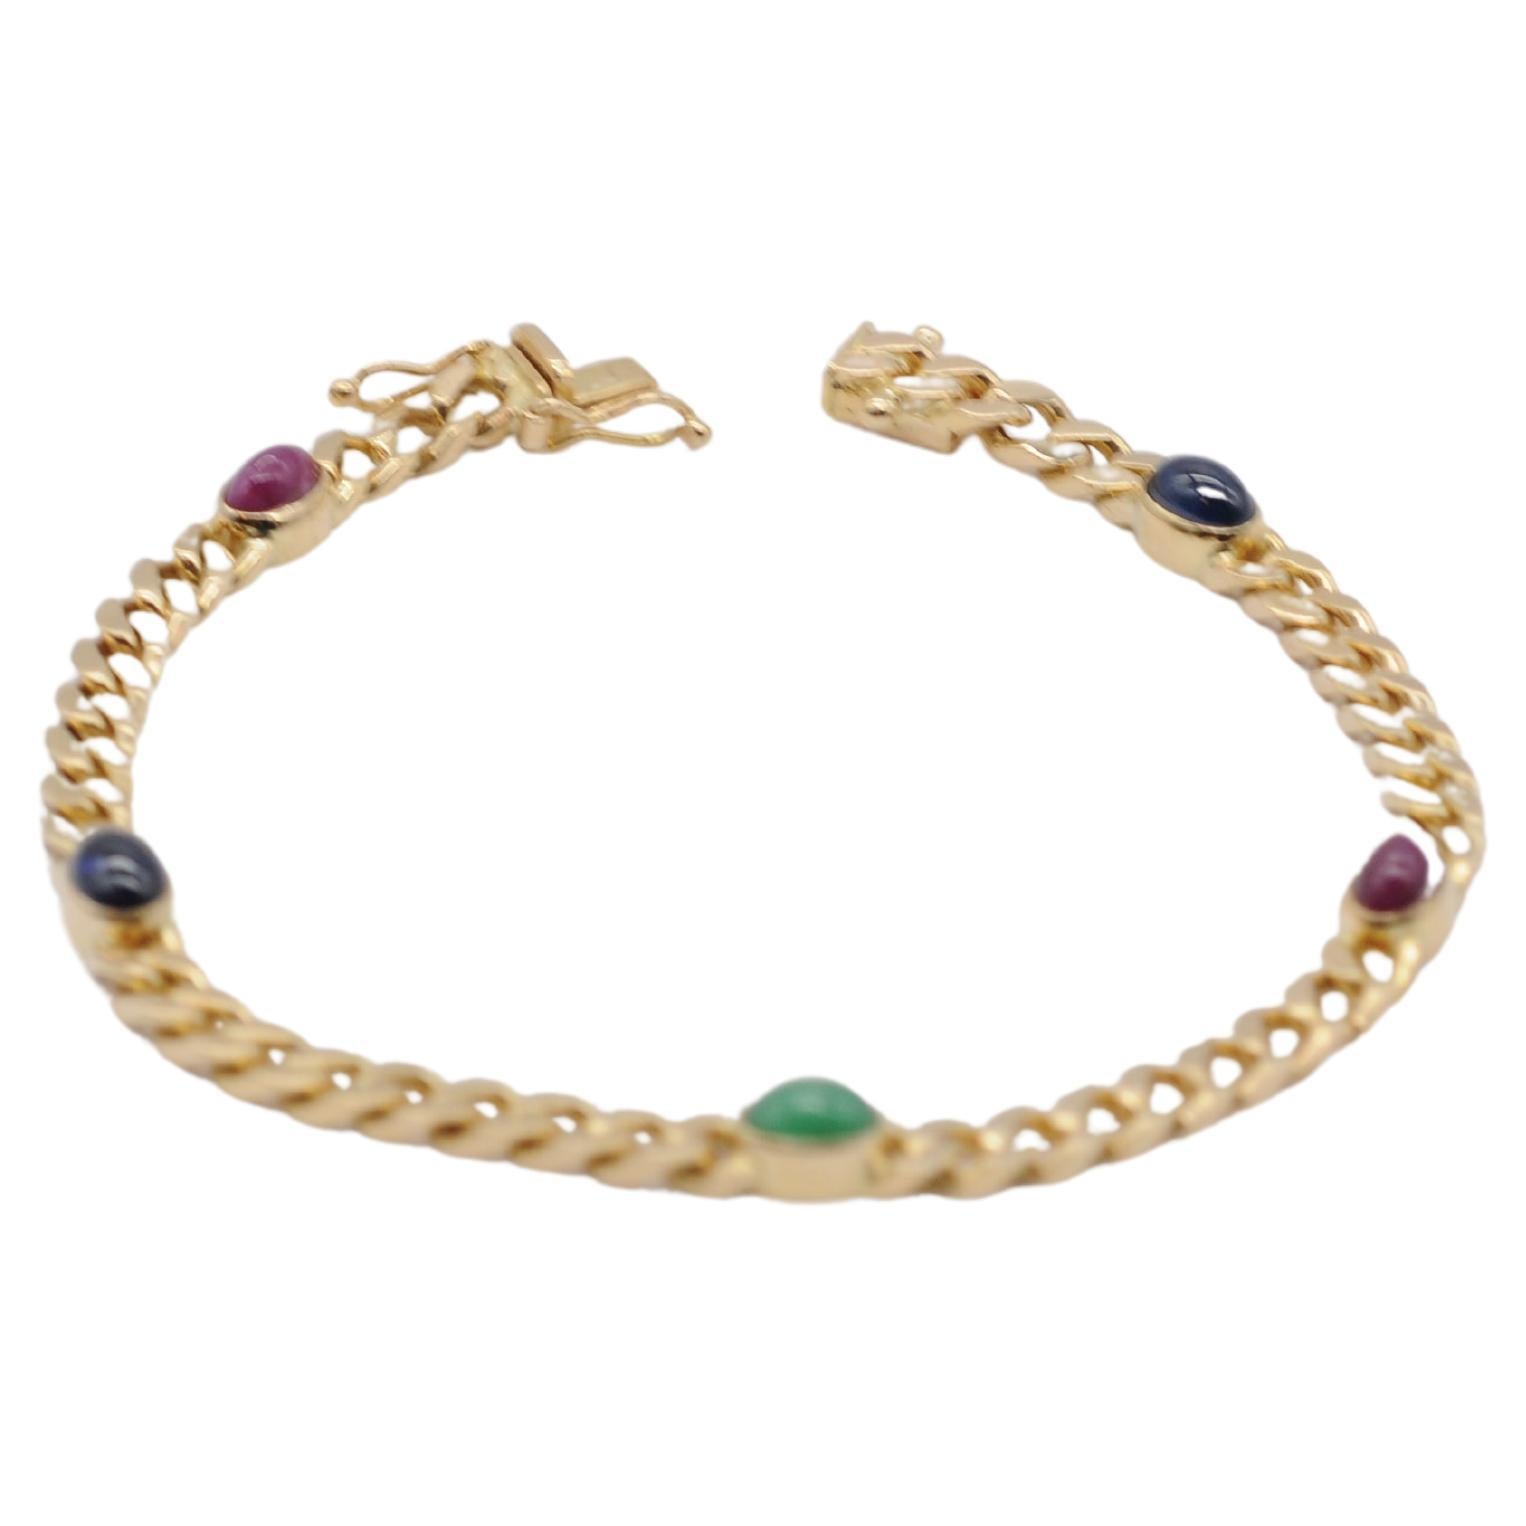 Noble 14k yellow gold bracelet with cabochon For Sale 5